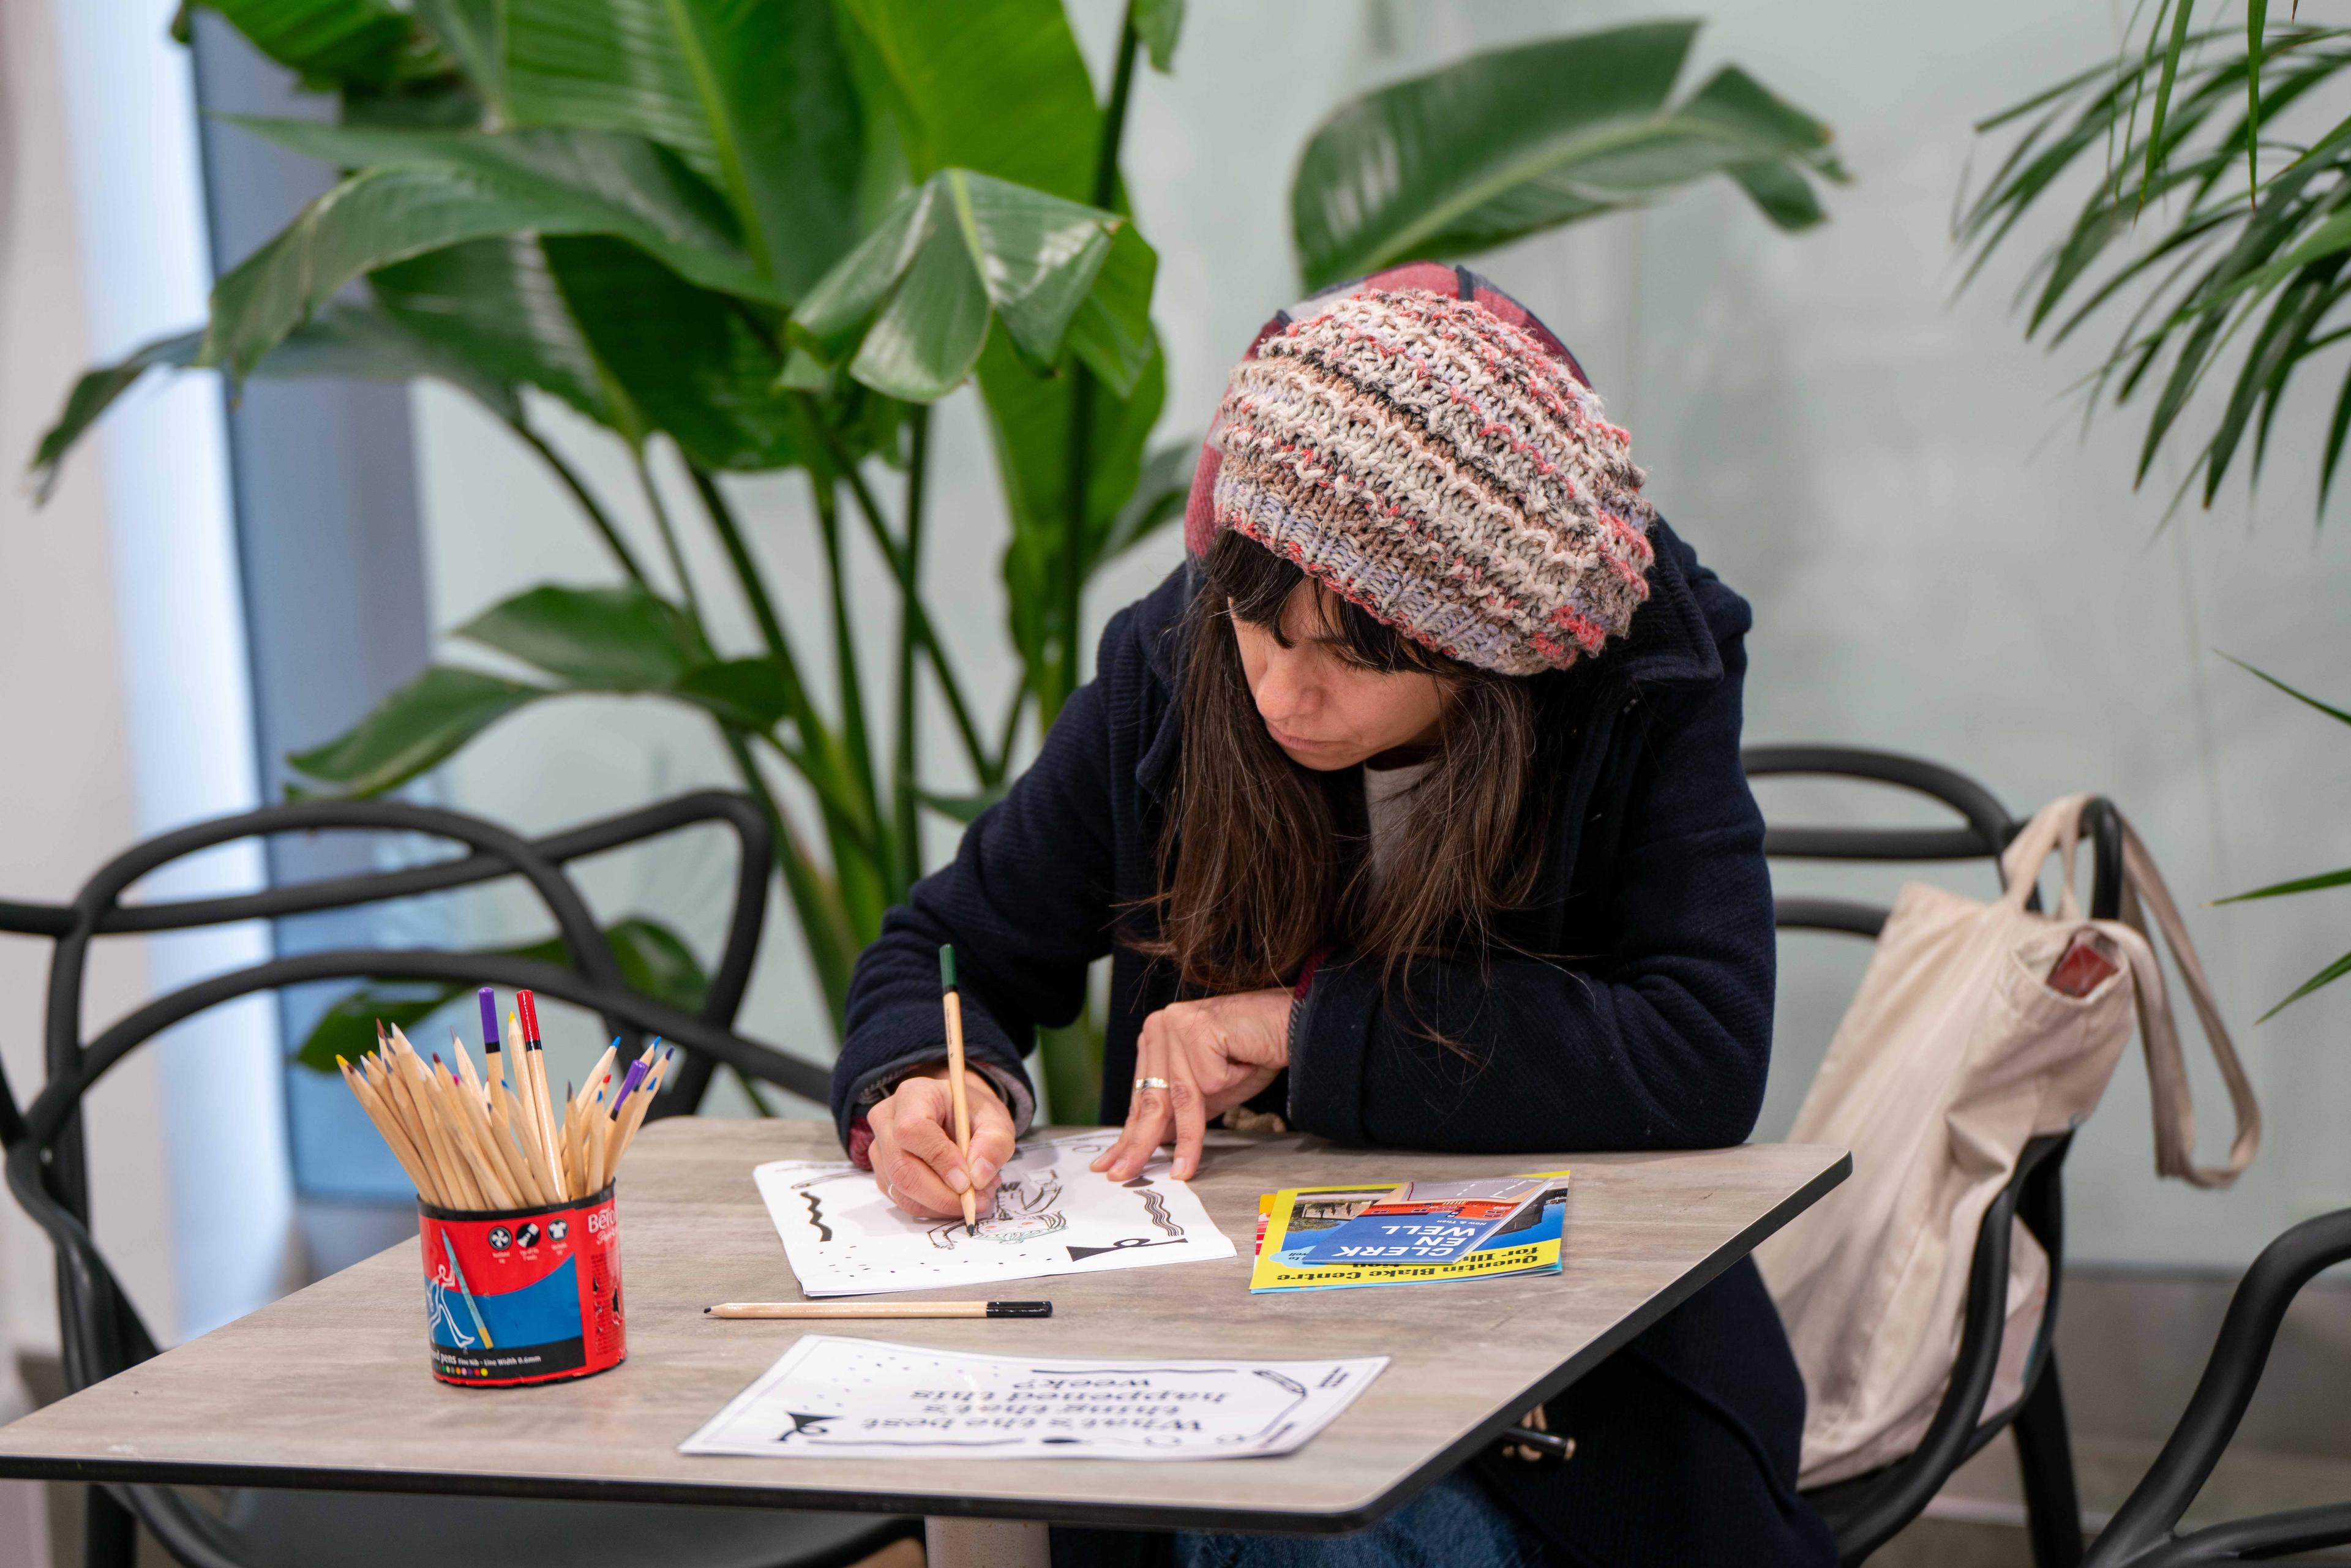 Photograph of a person at a desk drawing with pencils on a piece of paper on a table.